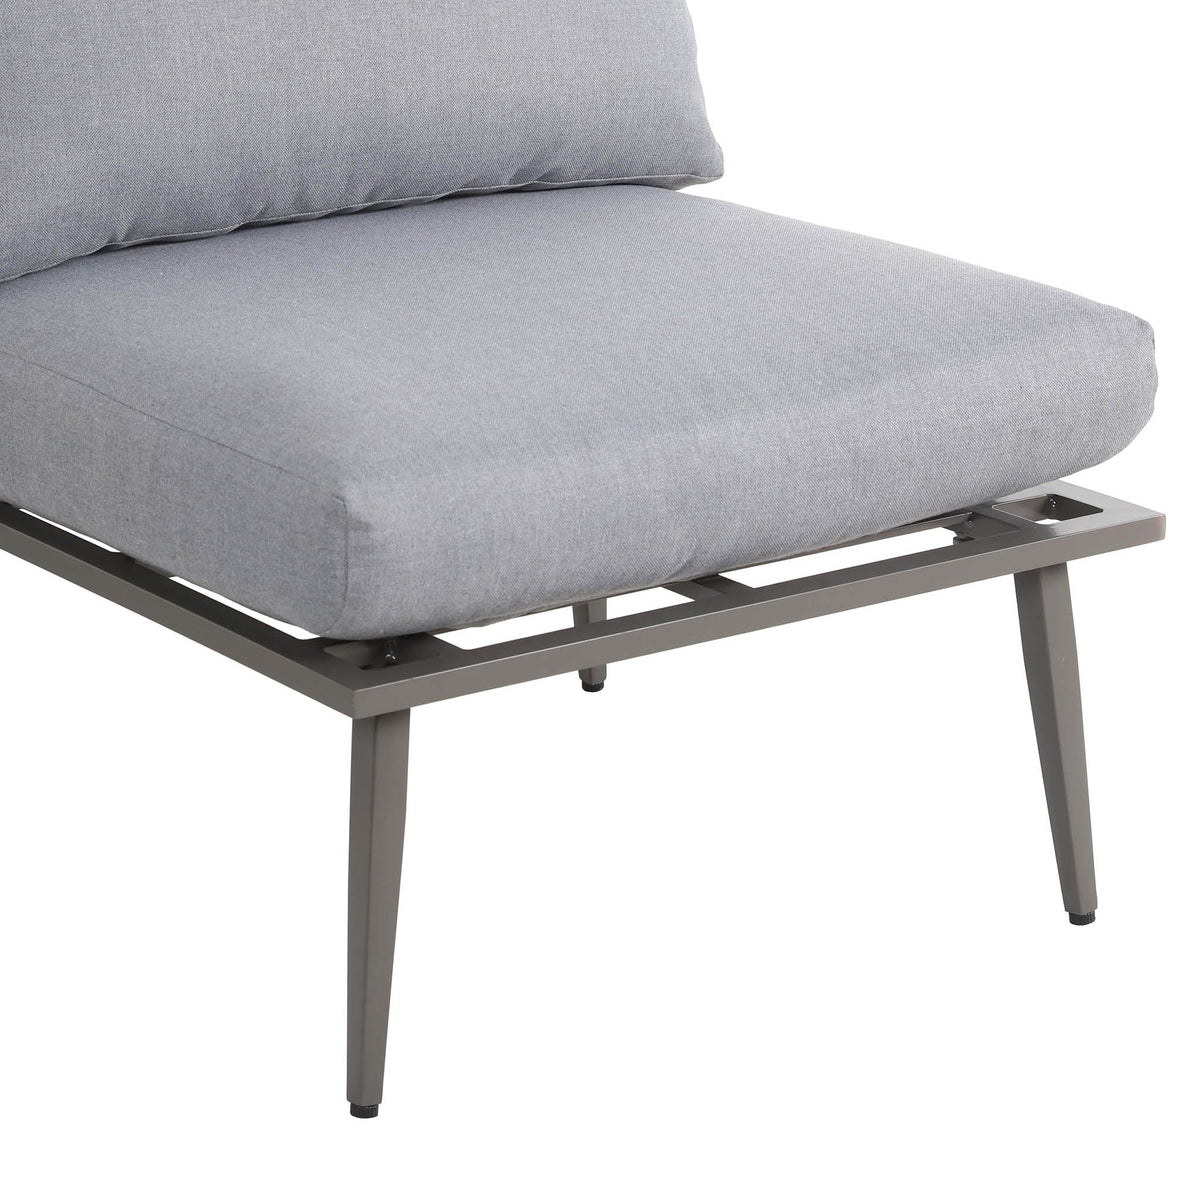 Mayfair 150cm Grey Outdoor Corner Fire Pit Table Lounge Set close up of padding seat cushions and aluminium legs